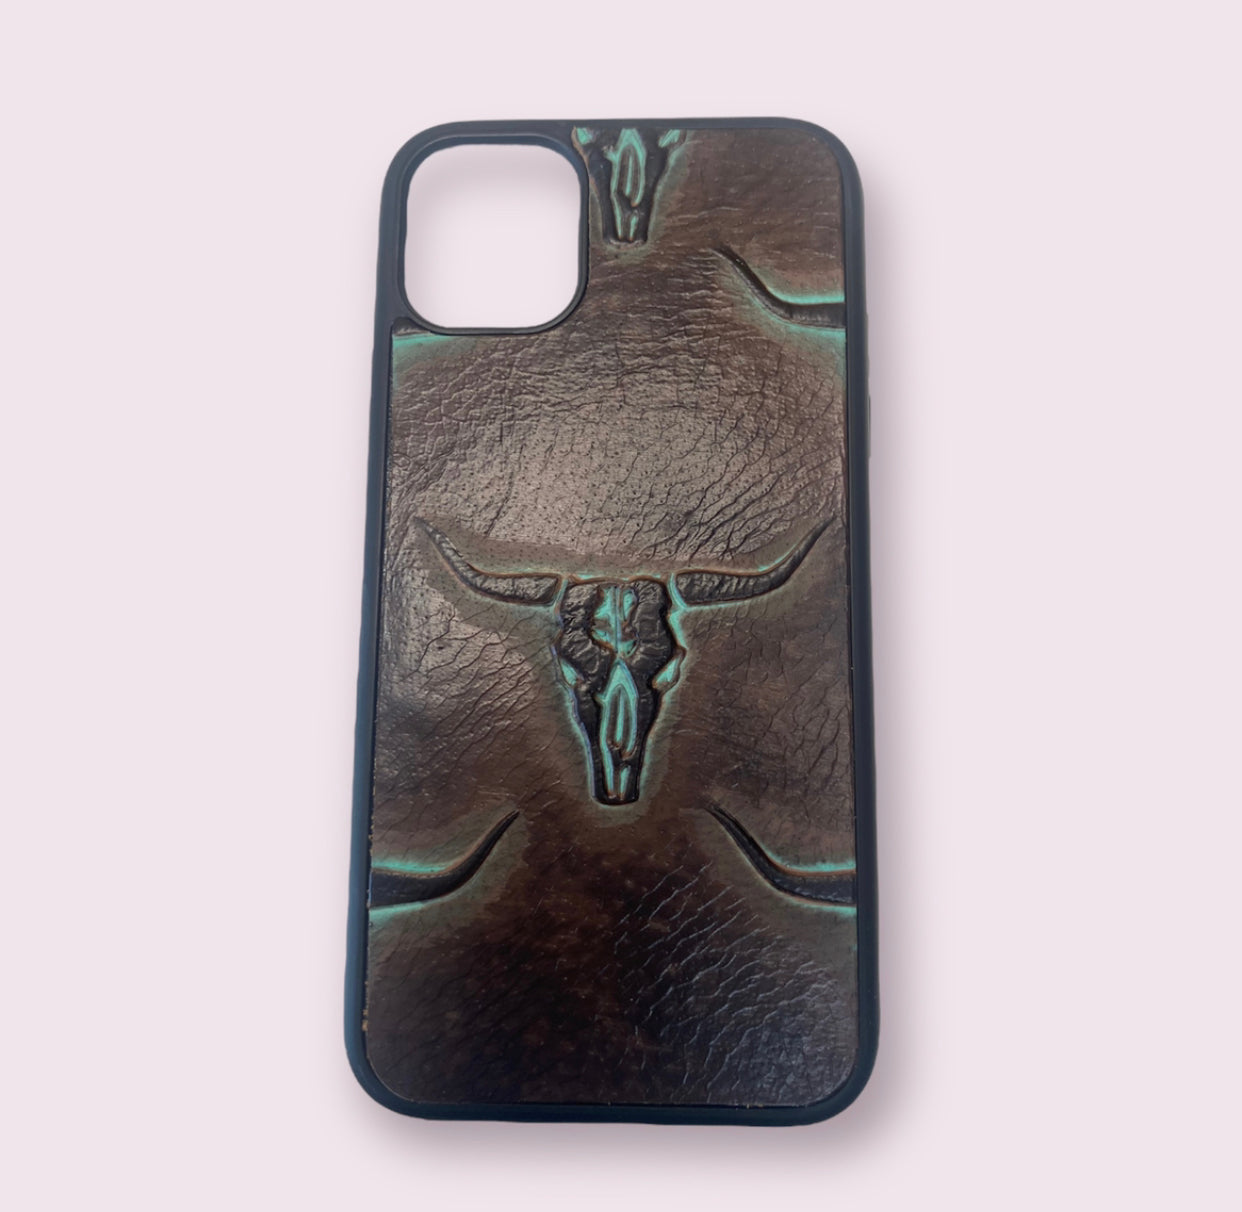 A8354 - IPhone 11 Pro Max Tooled Leather Case